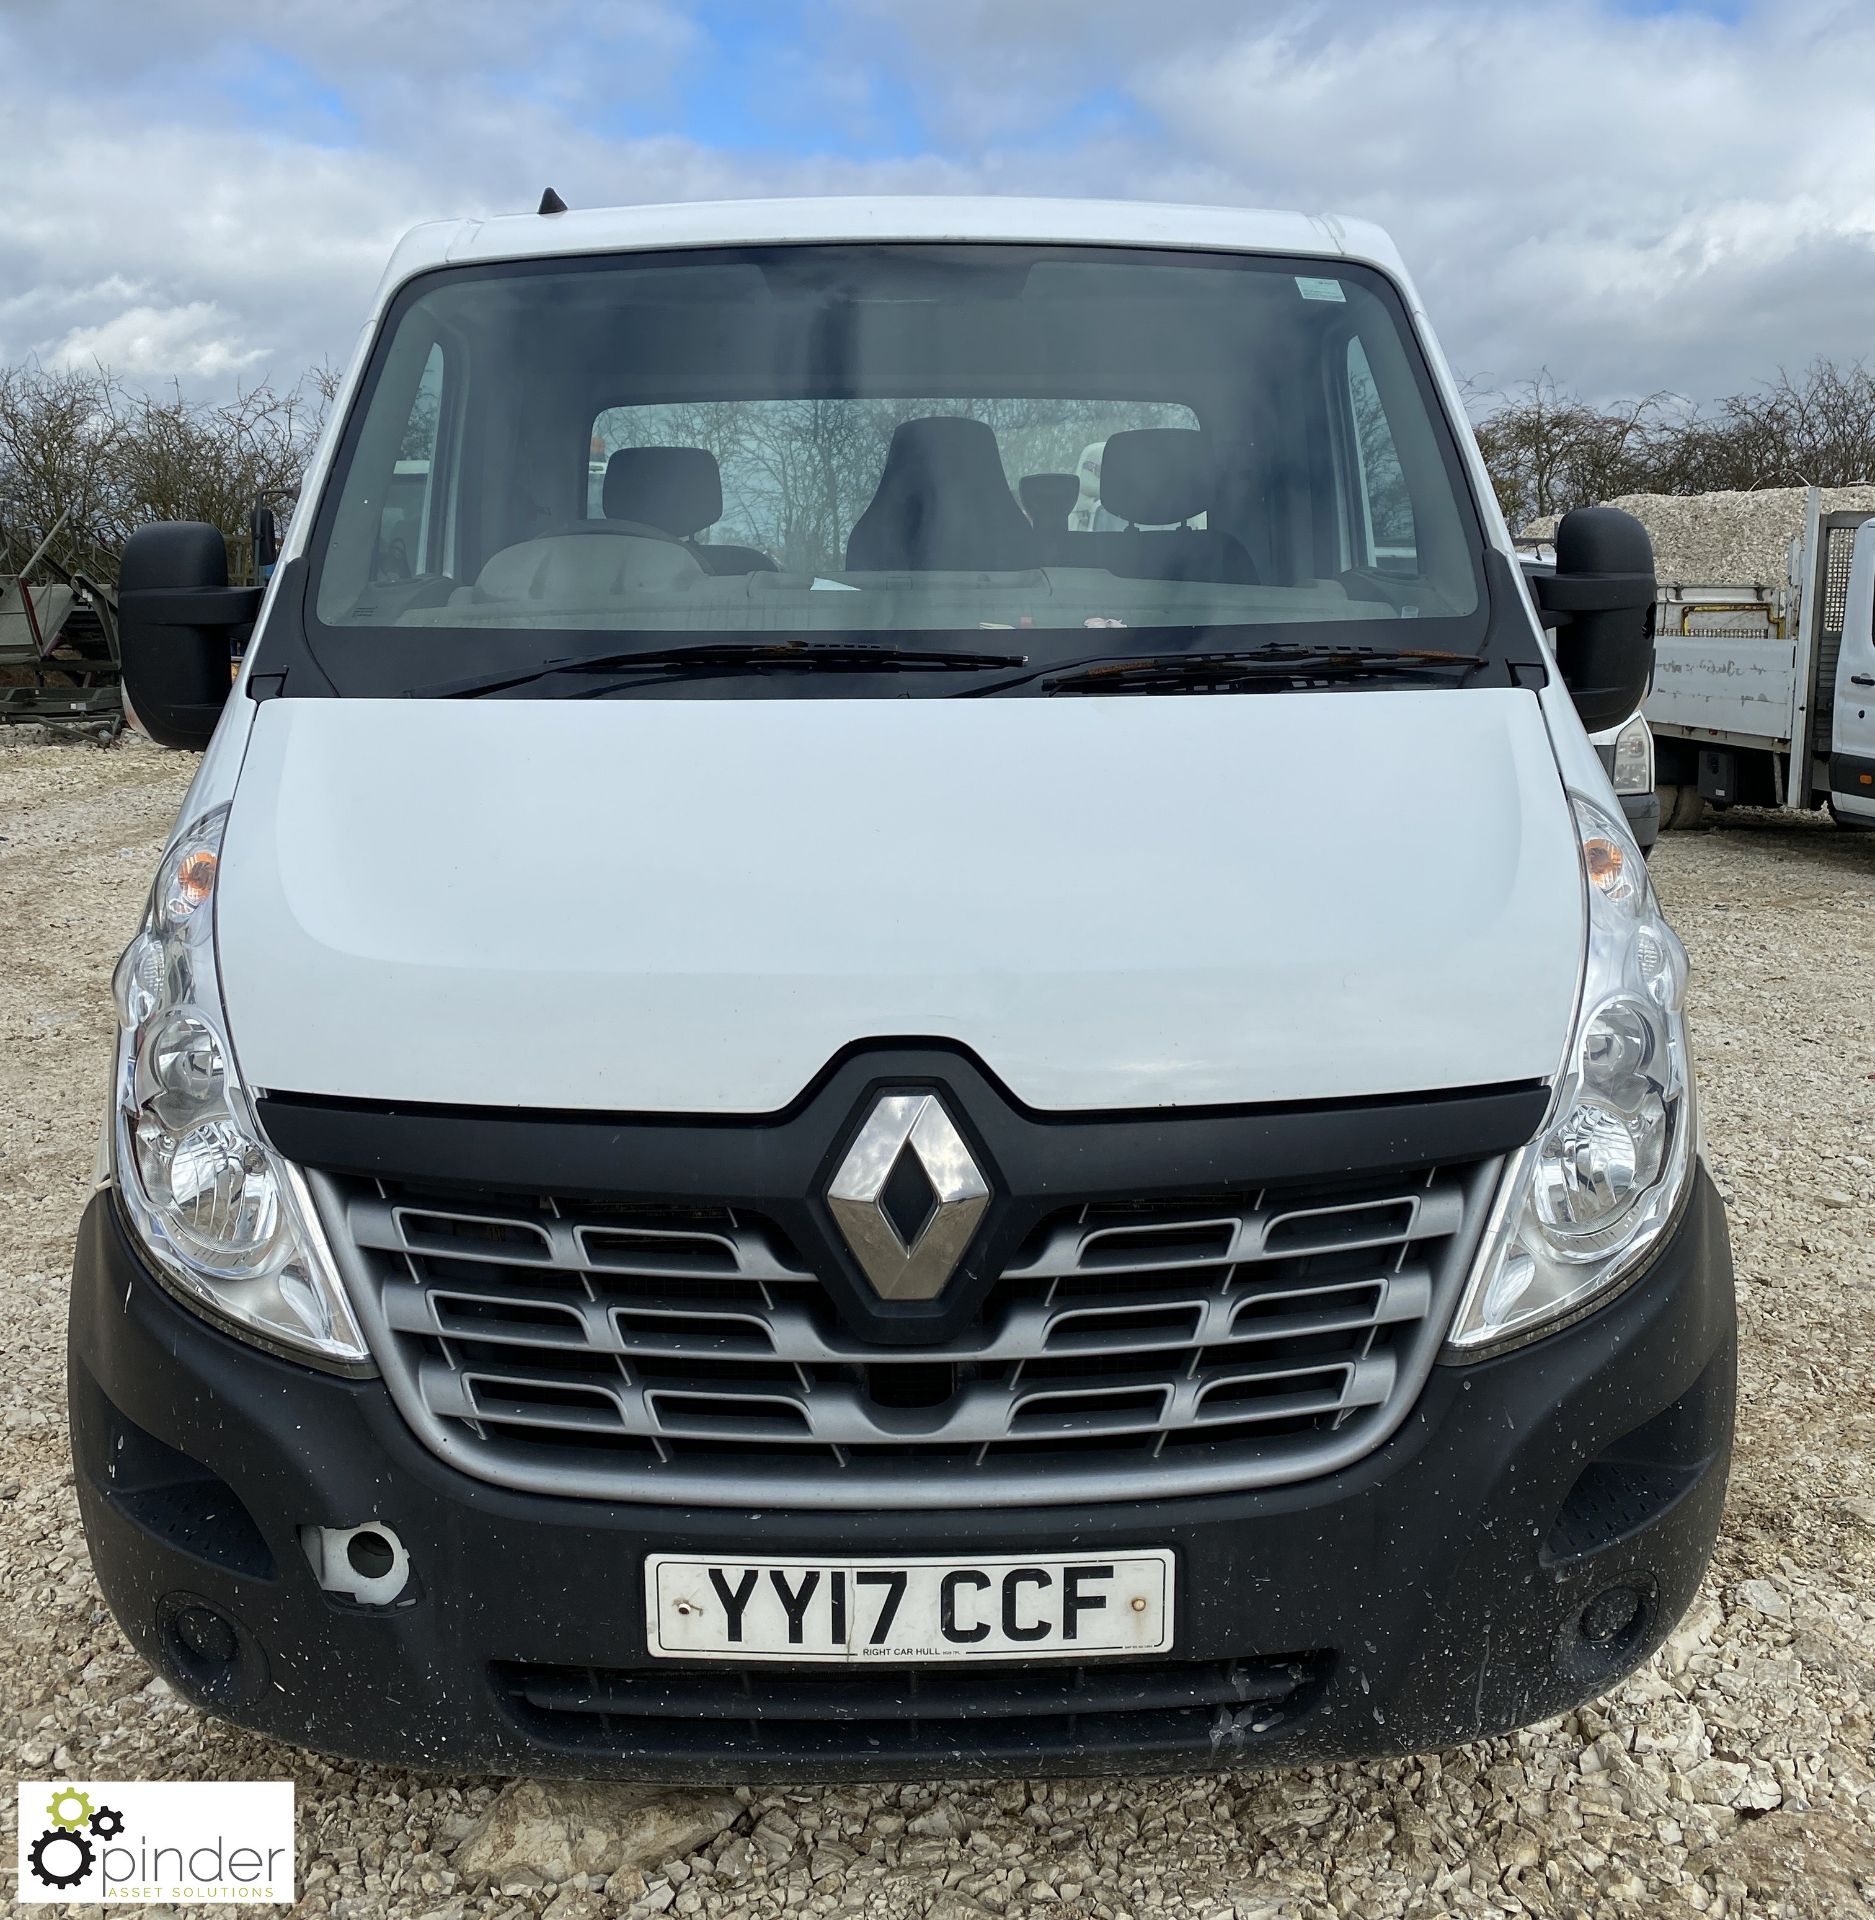 Renault Master LL35 Business DCi Recovery Truck, Registration: YY17 CCF, Date of Registration: 31 - Image 3 of 15